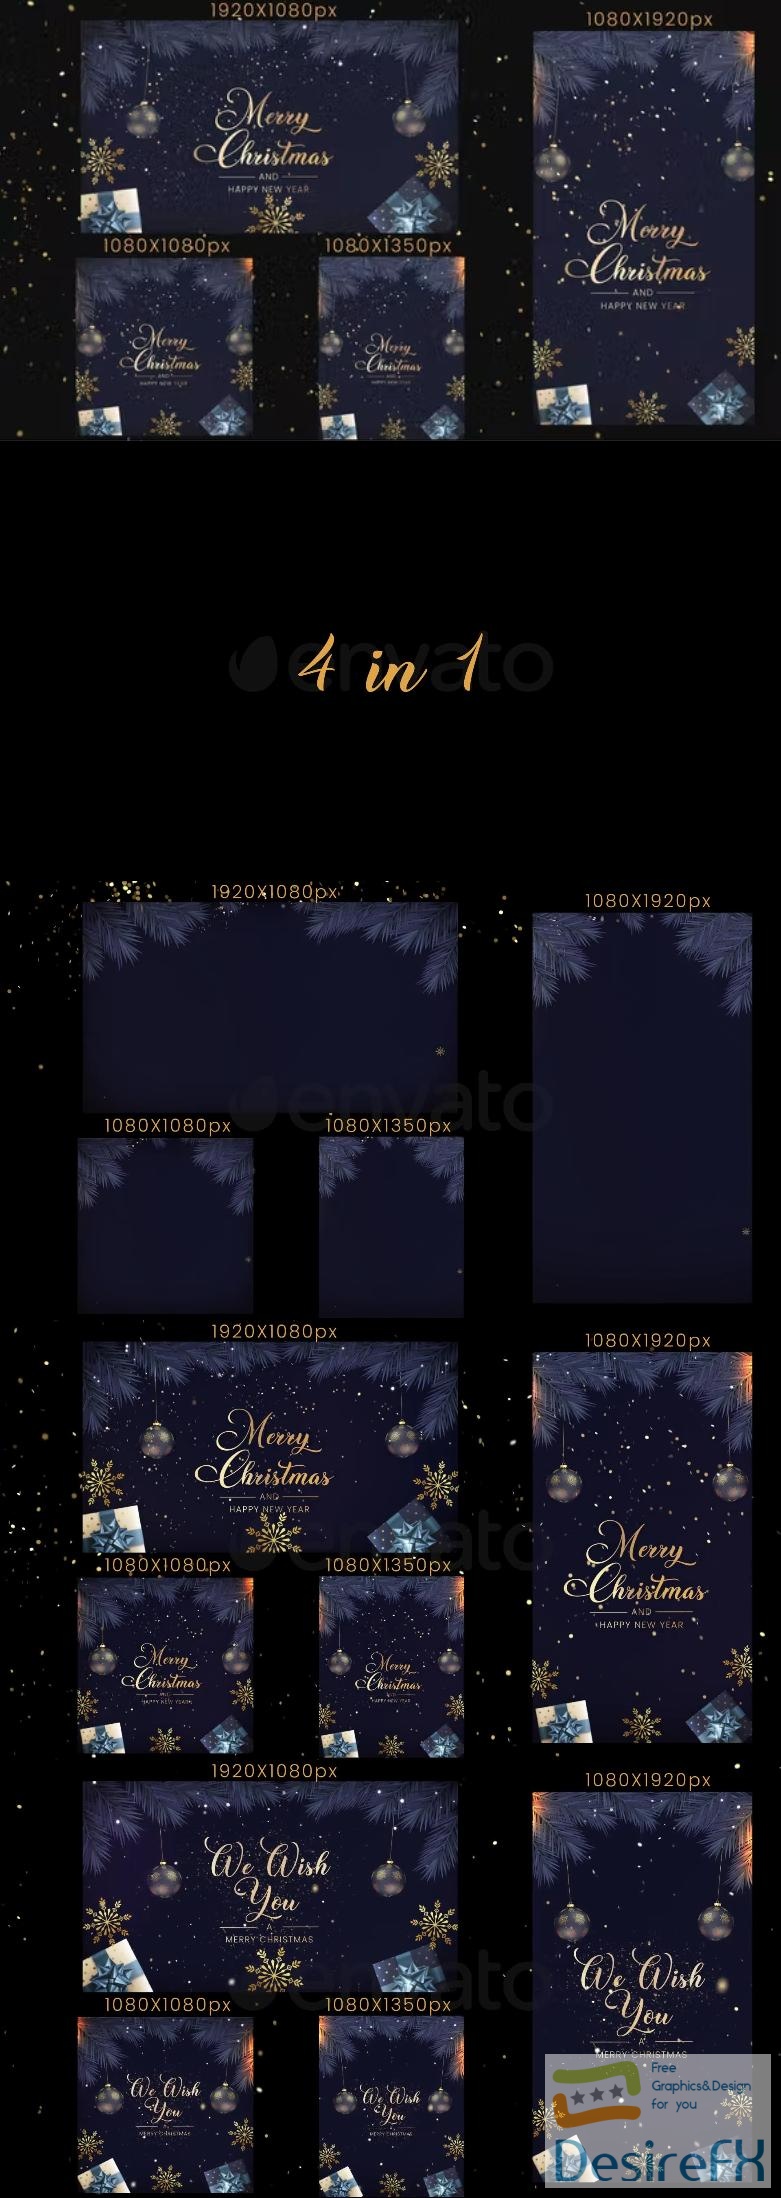 Videohive Christmas Intro 4 in 1 41650076